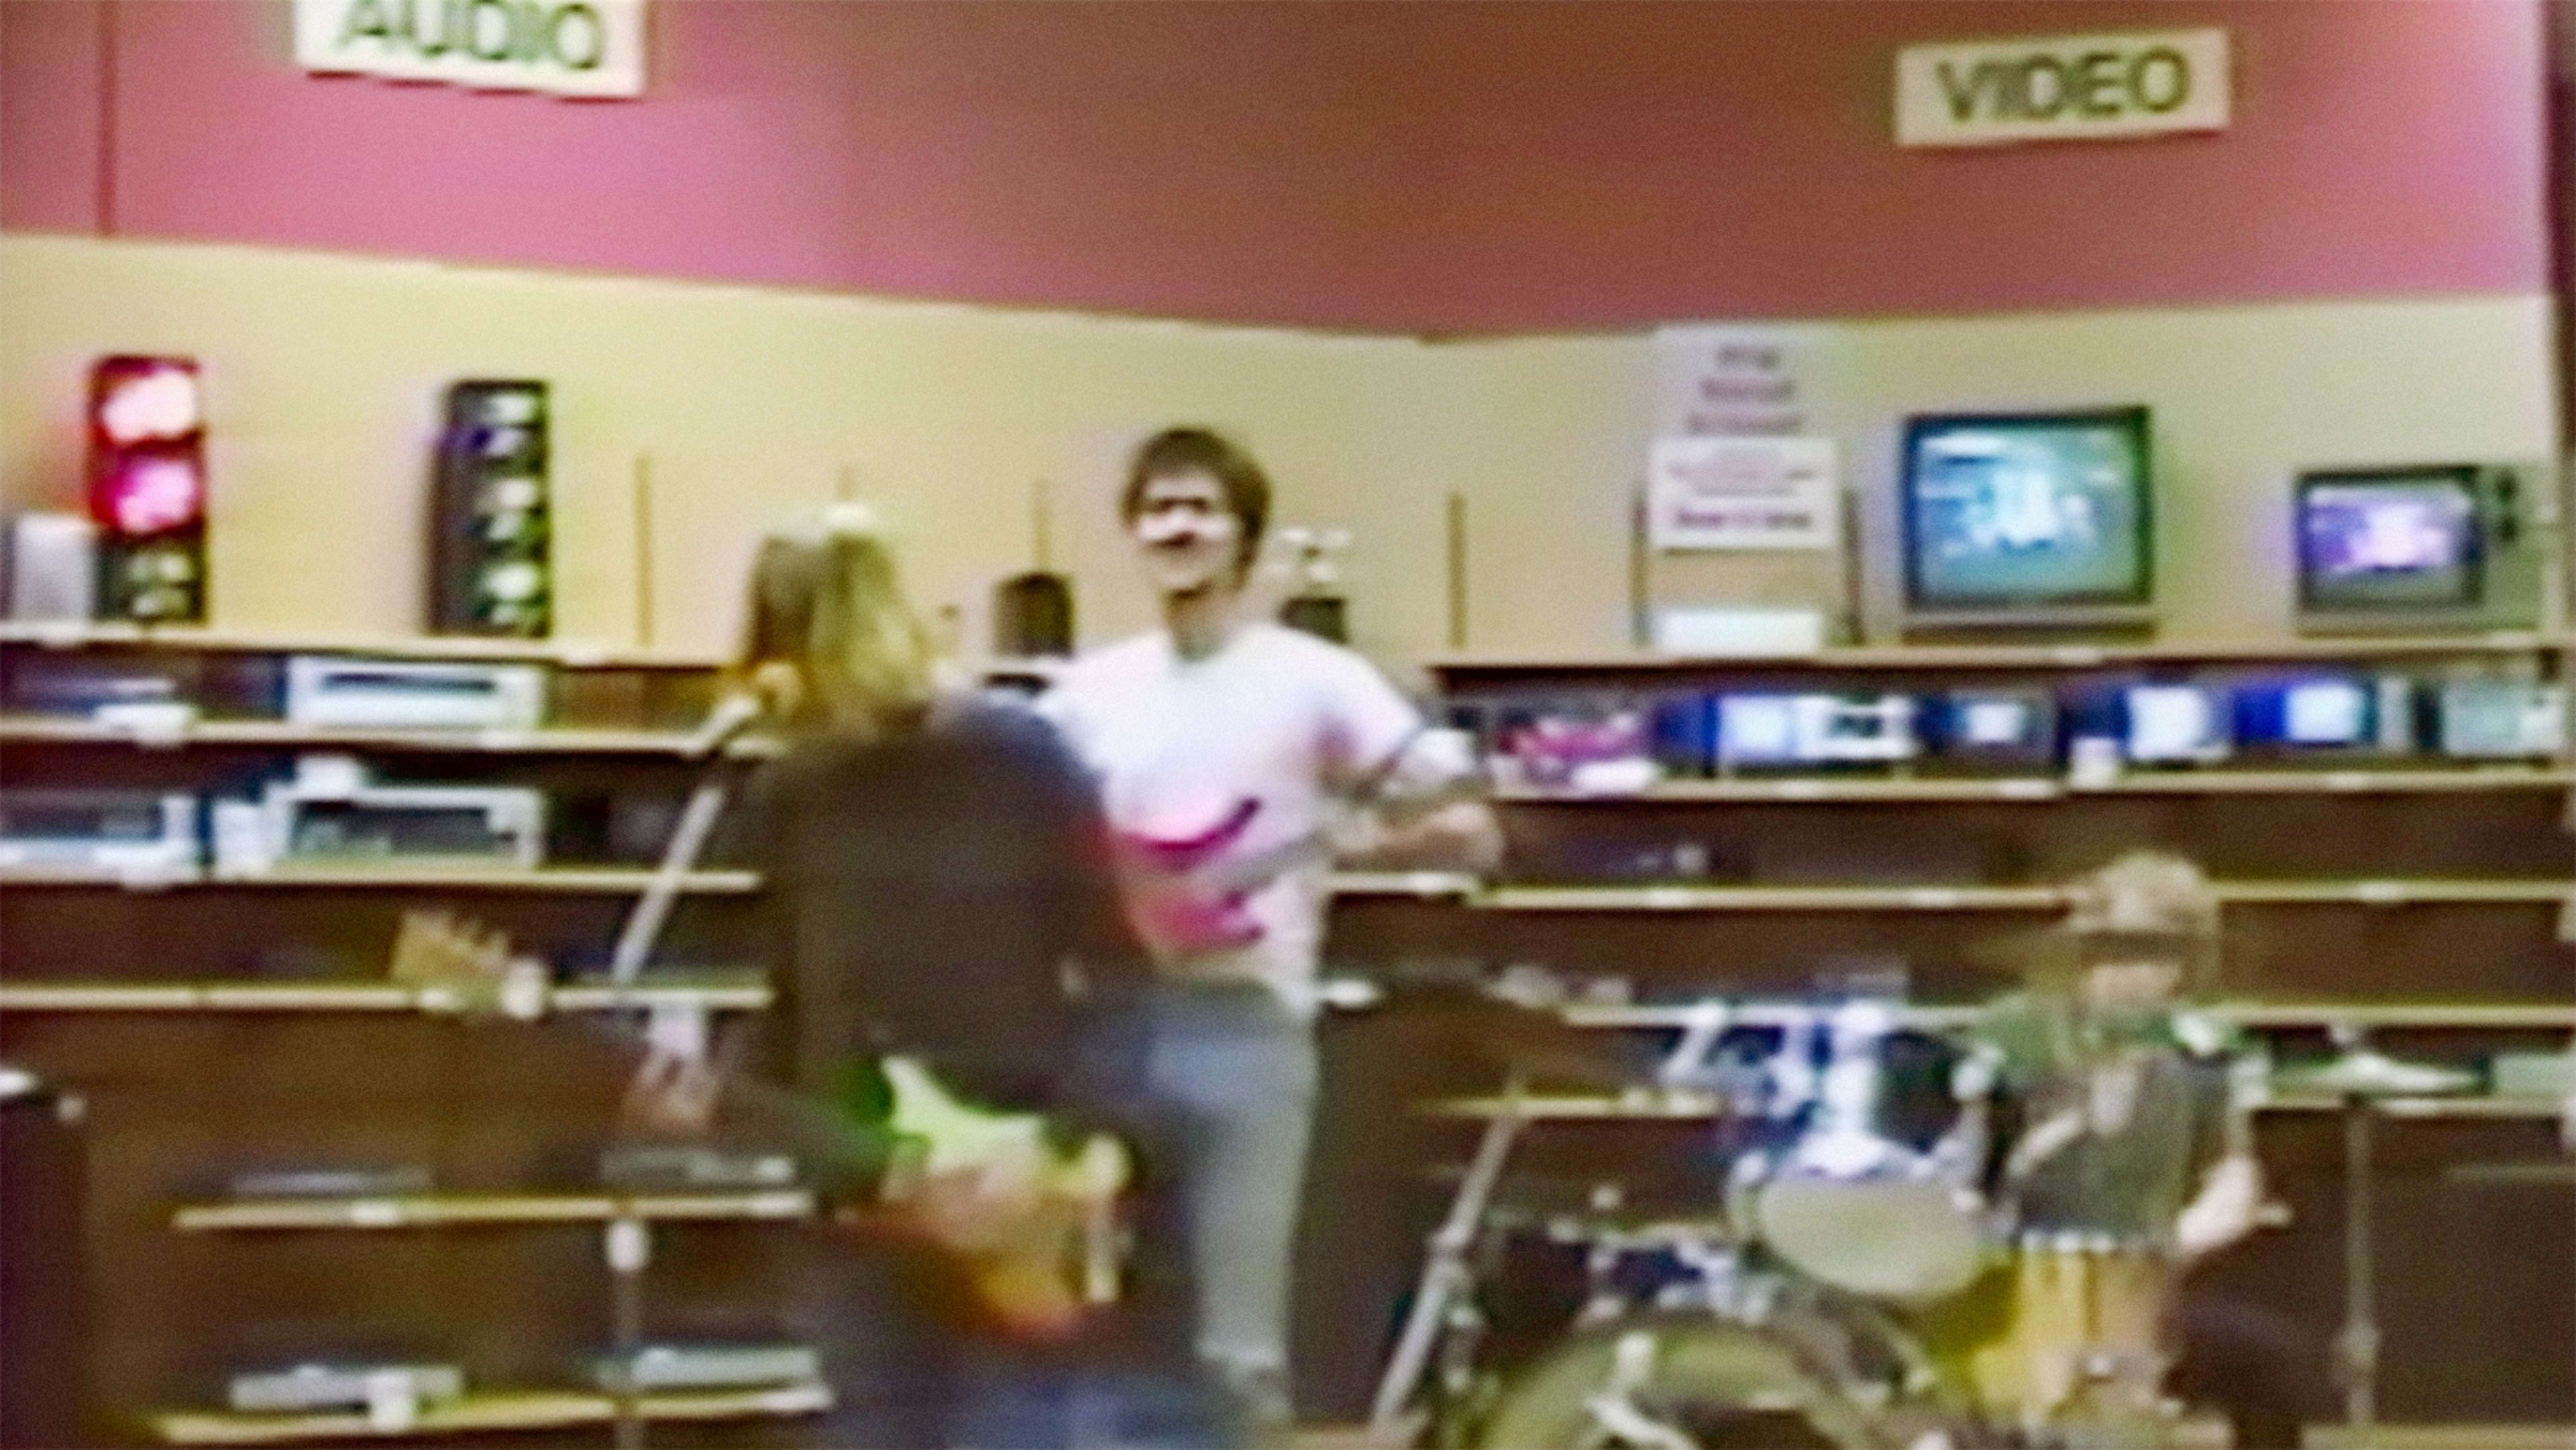 Newly Unearthed Nirvana VHS Tape Shows How They Got Creative When They Were Broke